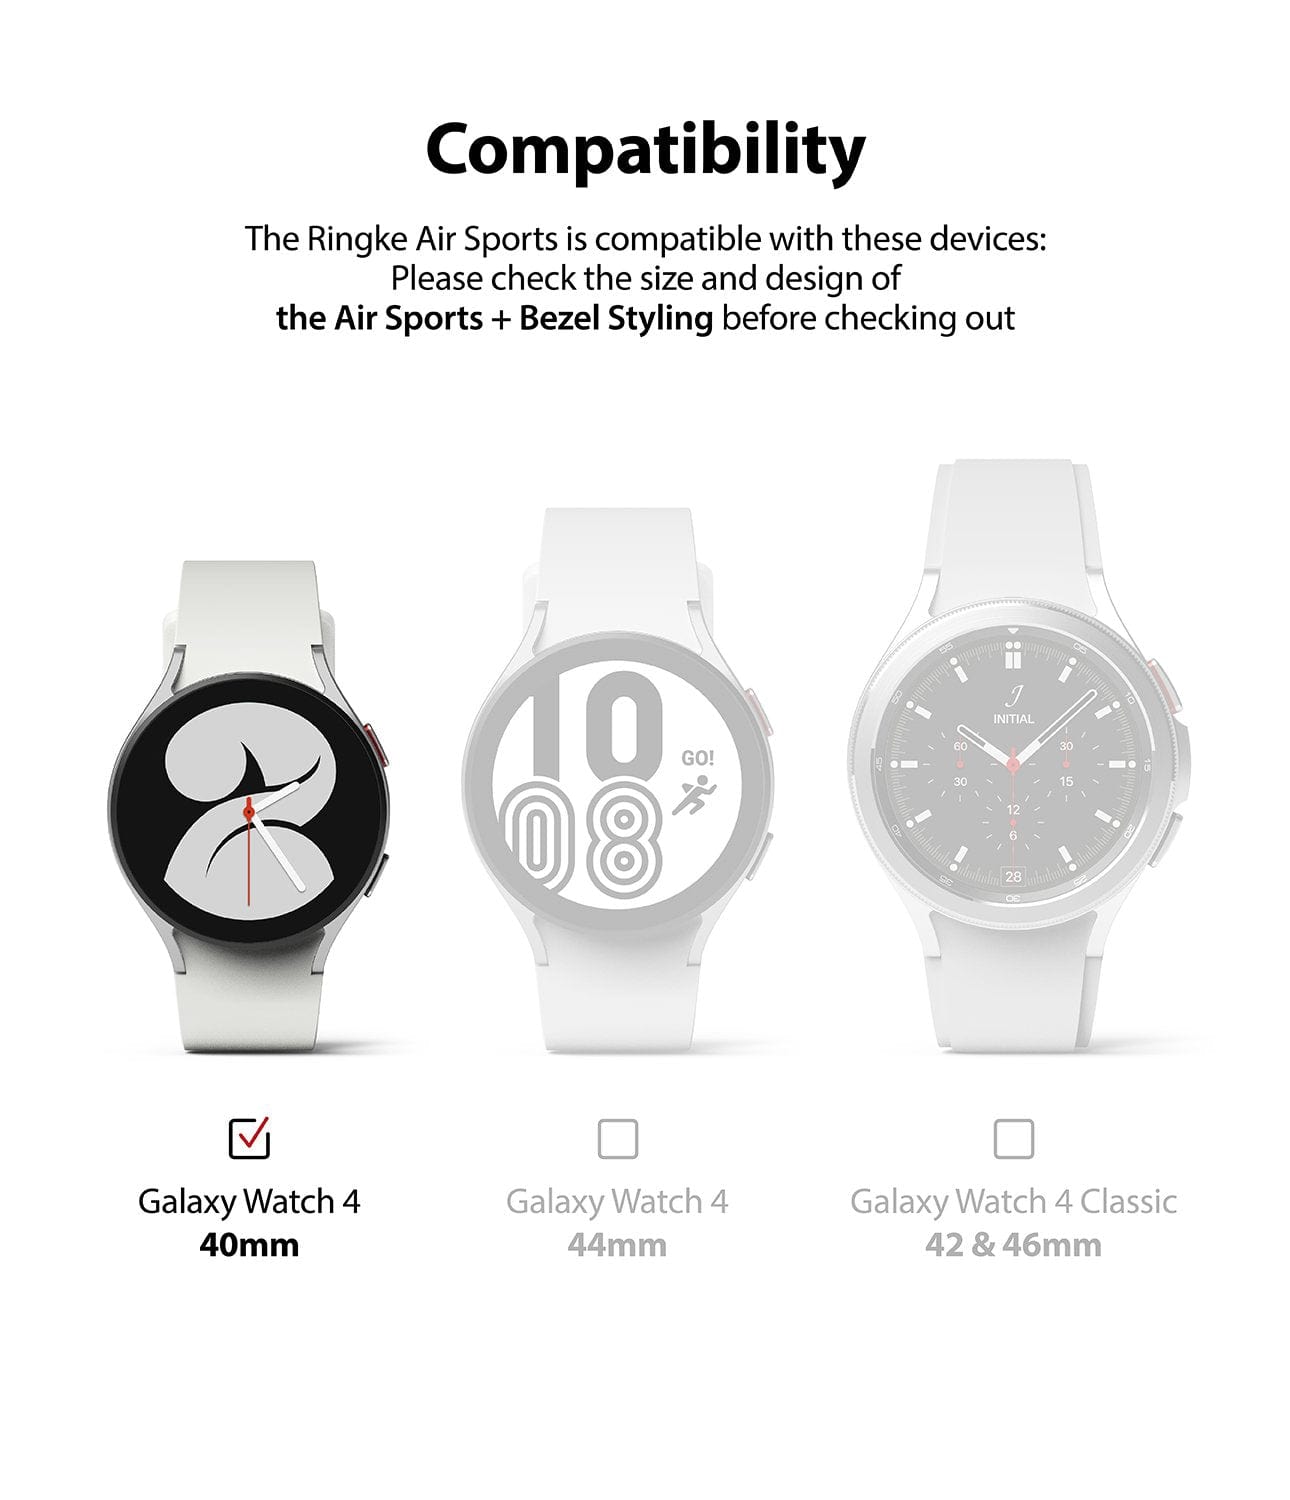 Our Air Sports + Bezel Styling combo is specifically designed to be compatible with the Galaxy Watch 4 40mm